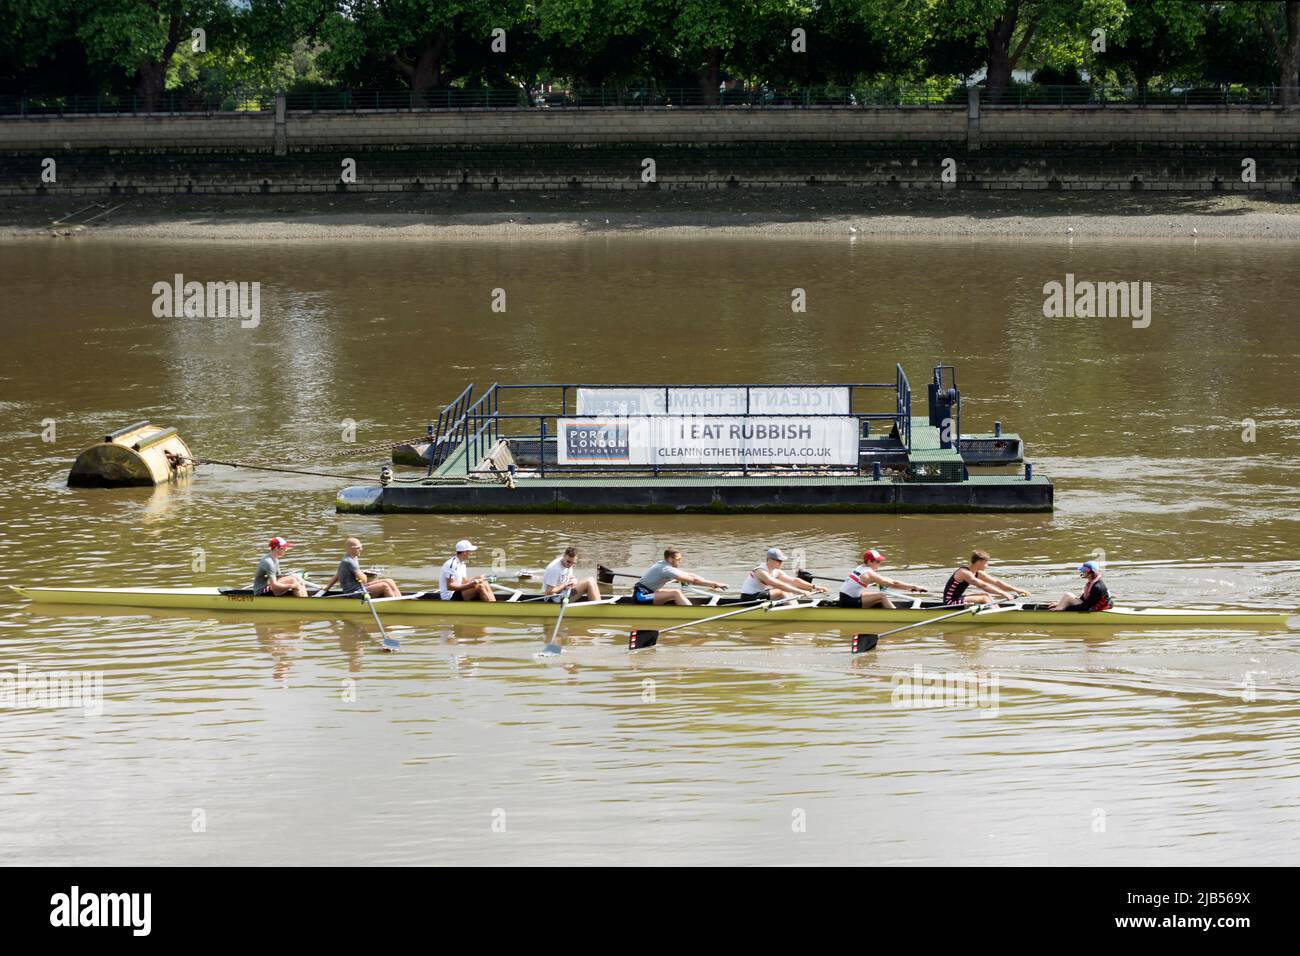 on the river thames at putney, a rowing eight pass a port of london authority barge with an i eat rubbish banner, part of a litter removal campaign. Stock Photo